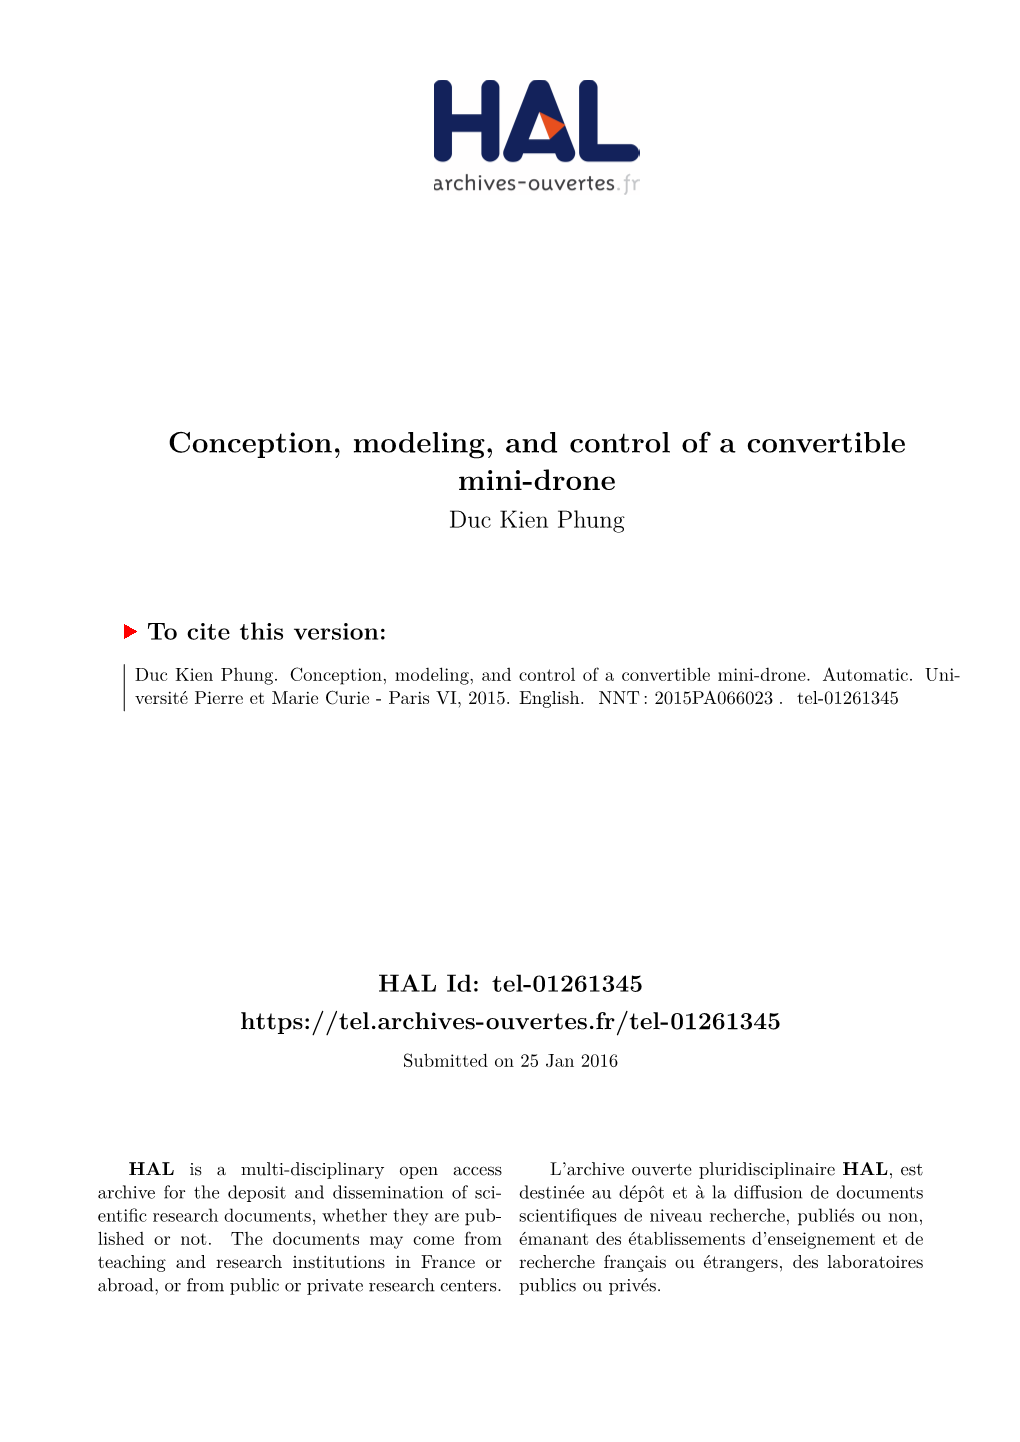 Conception, Modeling, and Control of a Convertible Mini-Drone Duc Kien Phung